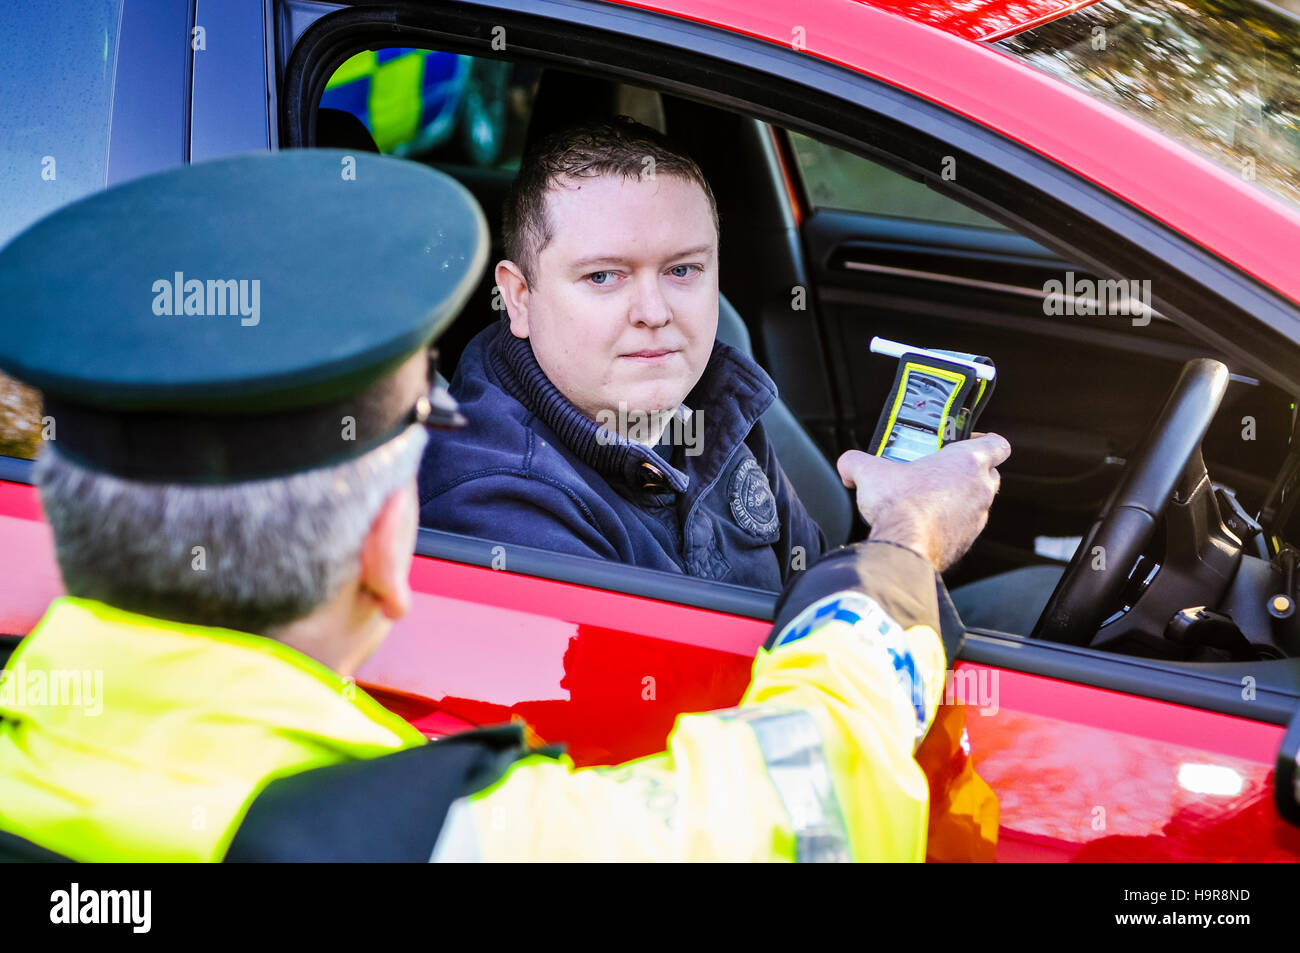 Belfast, Northern Ireland. 24 Nov 2016 - A driver blows into a roadside handheld alcohol breath tester breathalyser while it is held by a traffic police officer. Credit:  Stephen Barnes/Alamy Live News Stock Photo